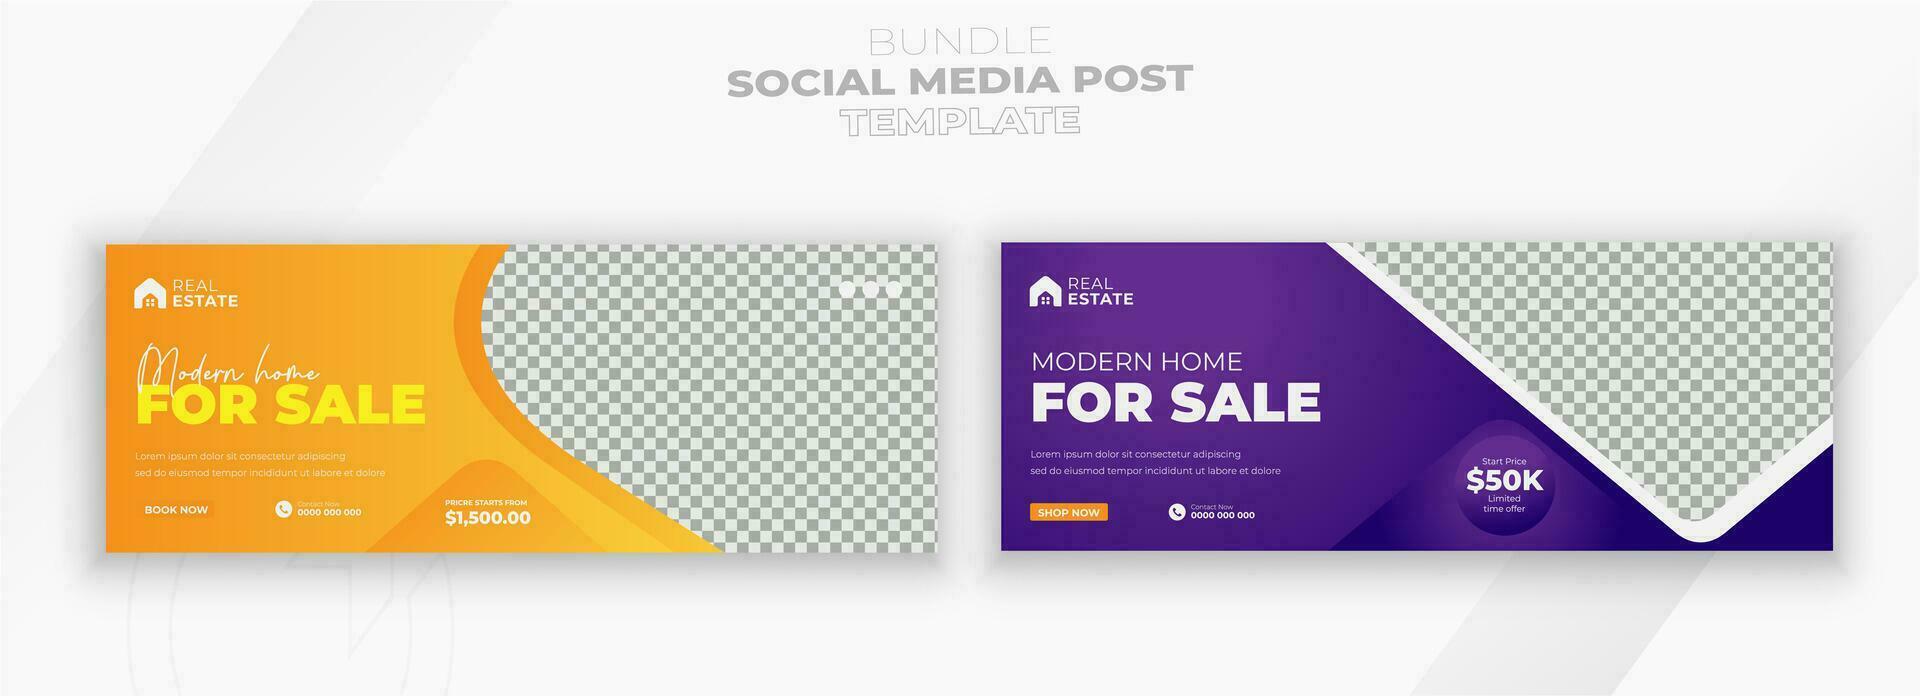 Real estate Luxury home property and 2 color gradient clean background or digital Construction social media post bundle design template vector